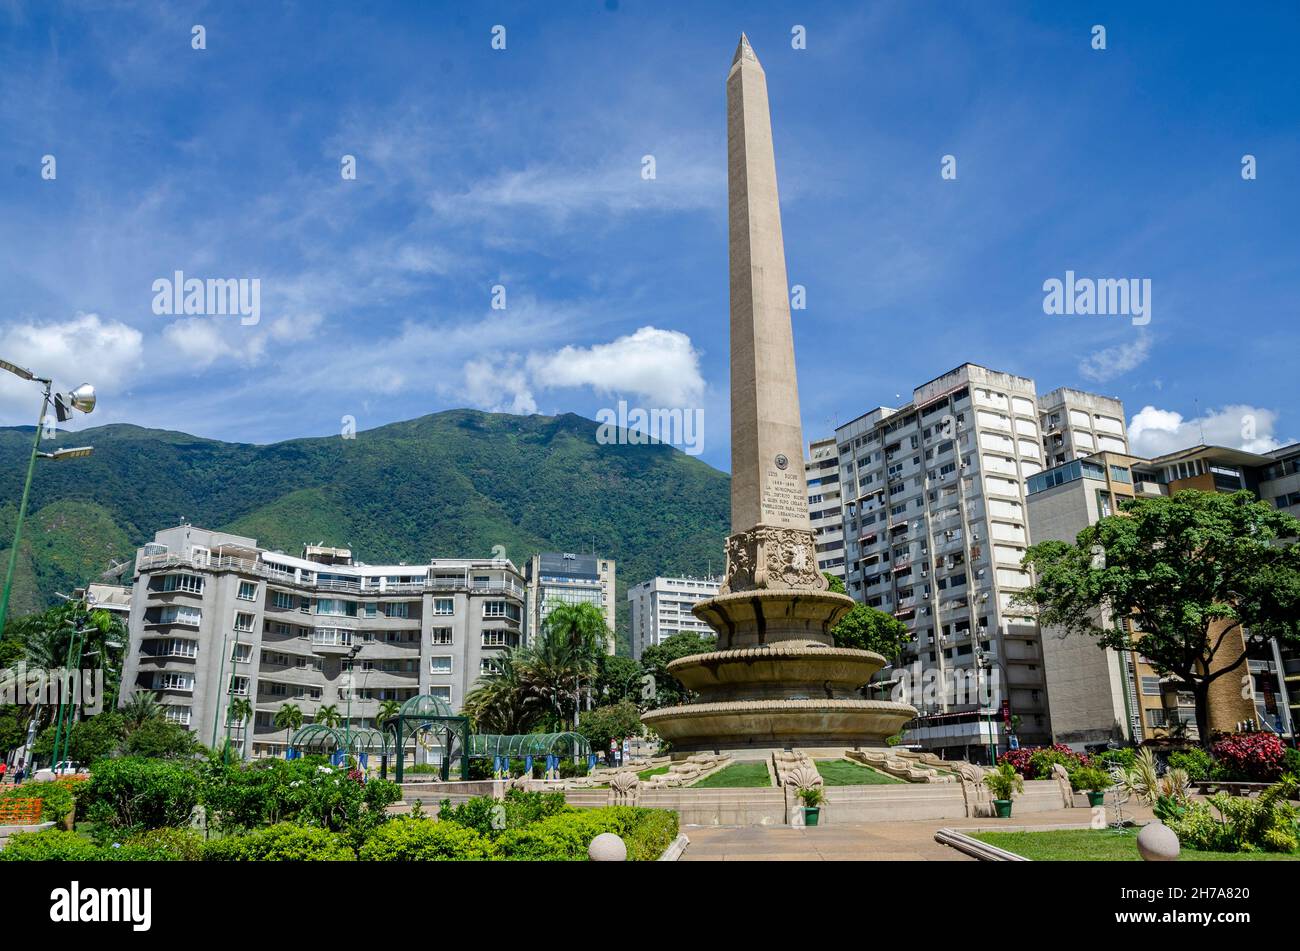 Plaza Francia de Altamira, an iconic place in Caracas Venezuelans vote on Sunday, November 21, in state and municipal elections, where 23 governors an Stock Photo